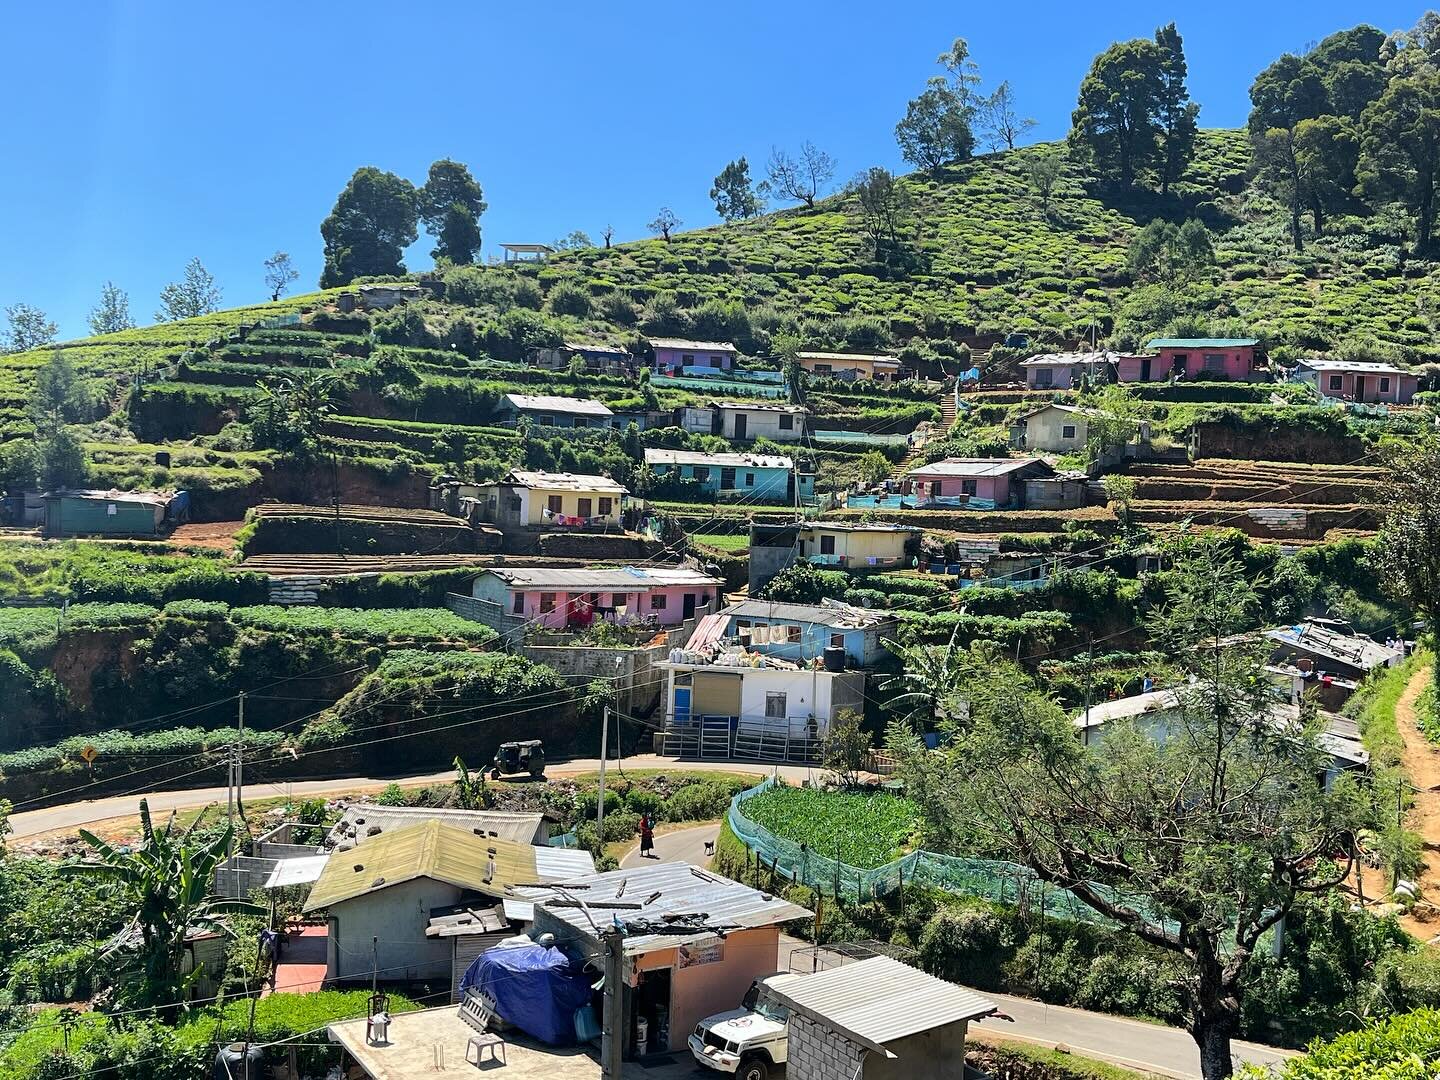 High up in the #tea country above #nuwaraeliya, #SriLanla. The weather is cooler here than anywhere else we&rsquo;ve been so far in the country! #travel #adventure